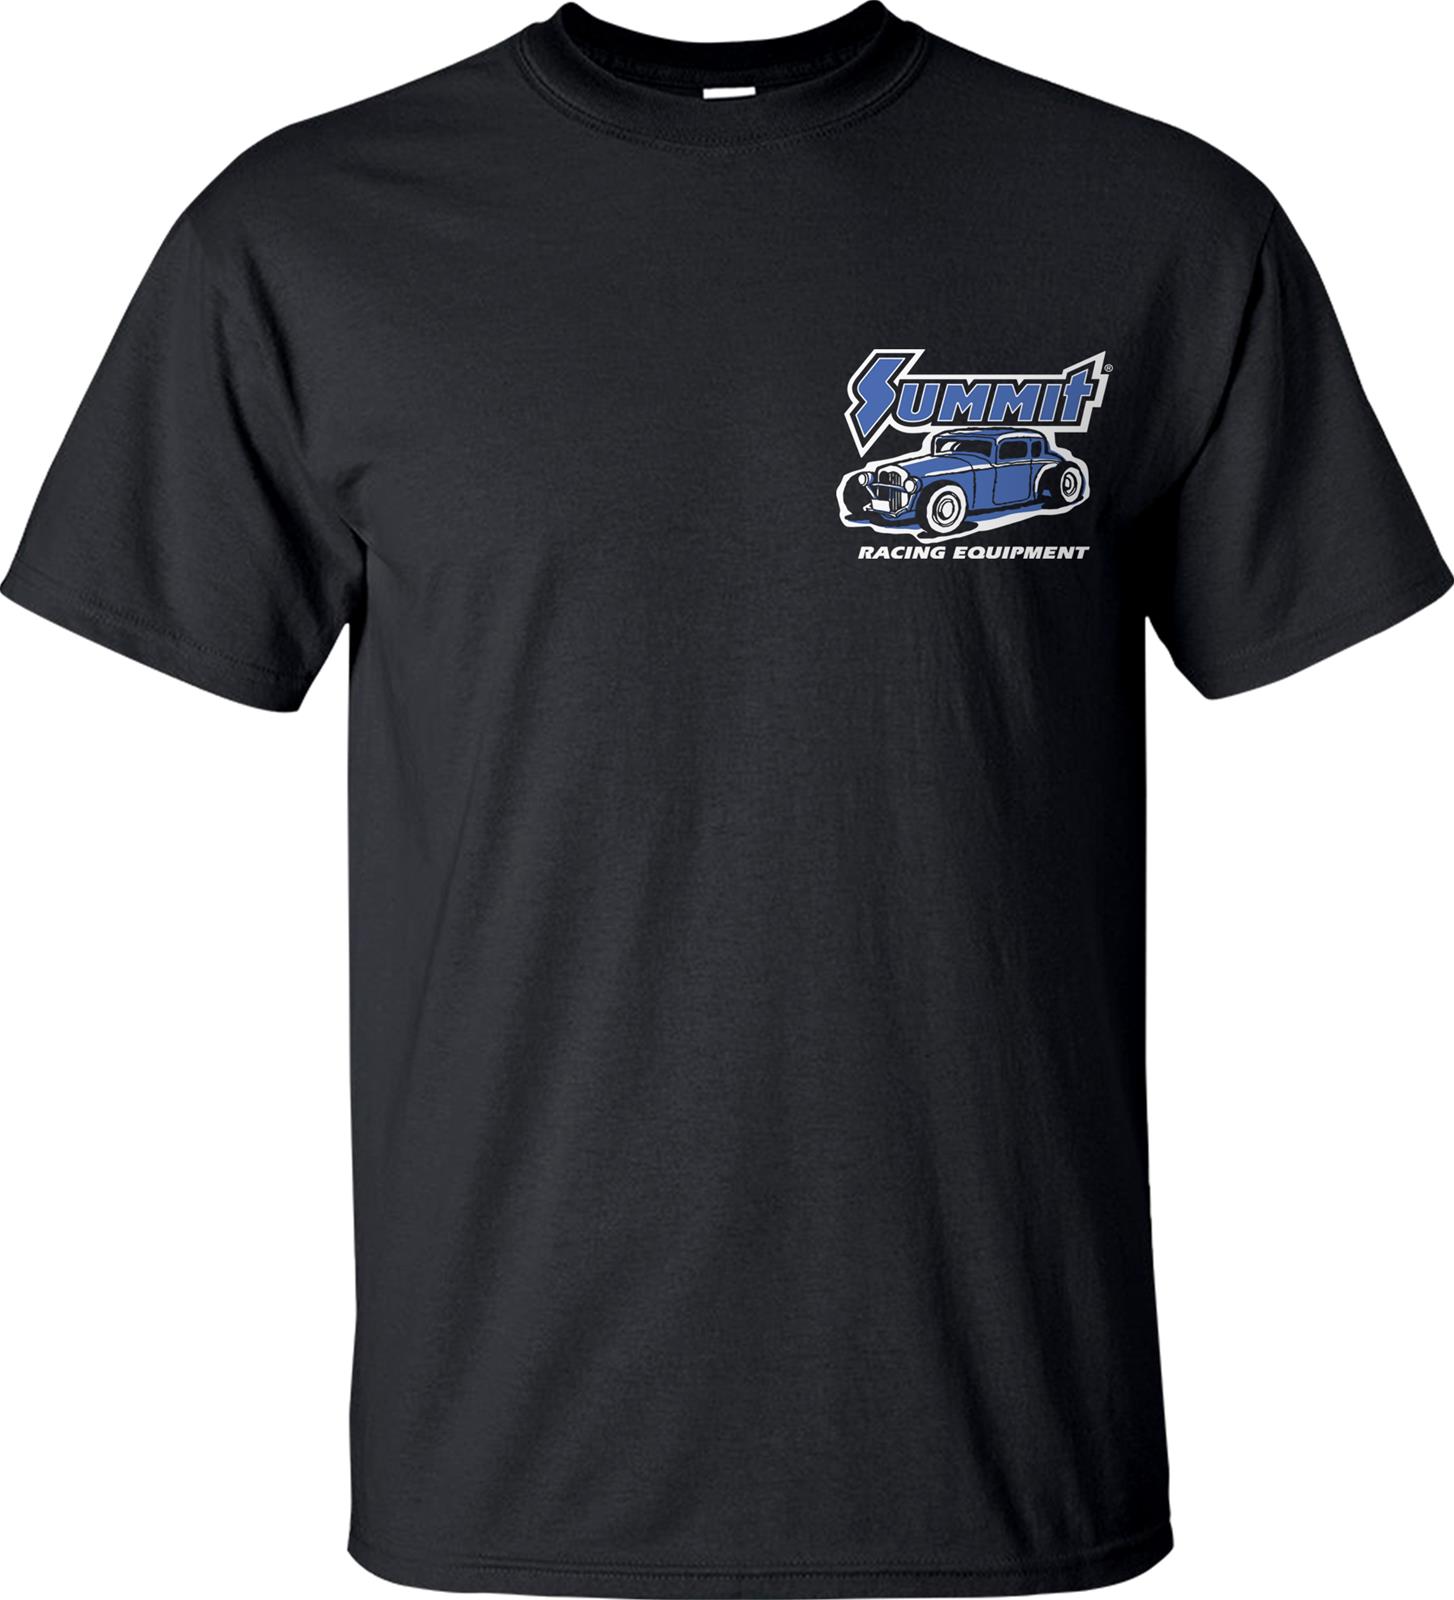 Summit Gifts 30947-MD No Quitter T-Shirts | Summit Racing